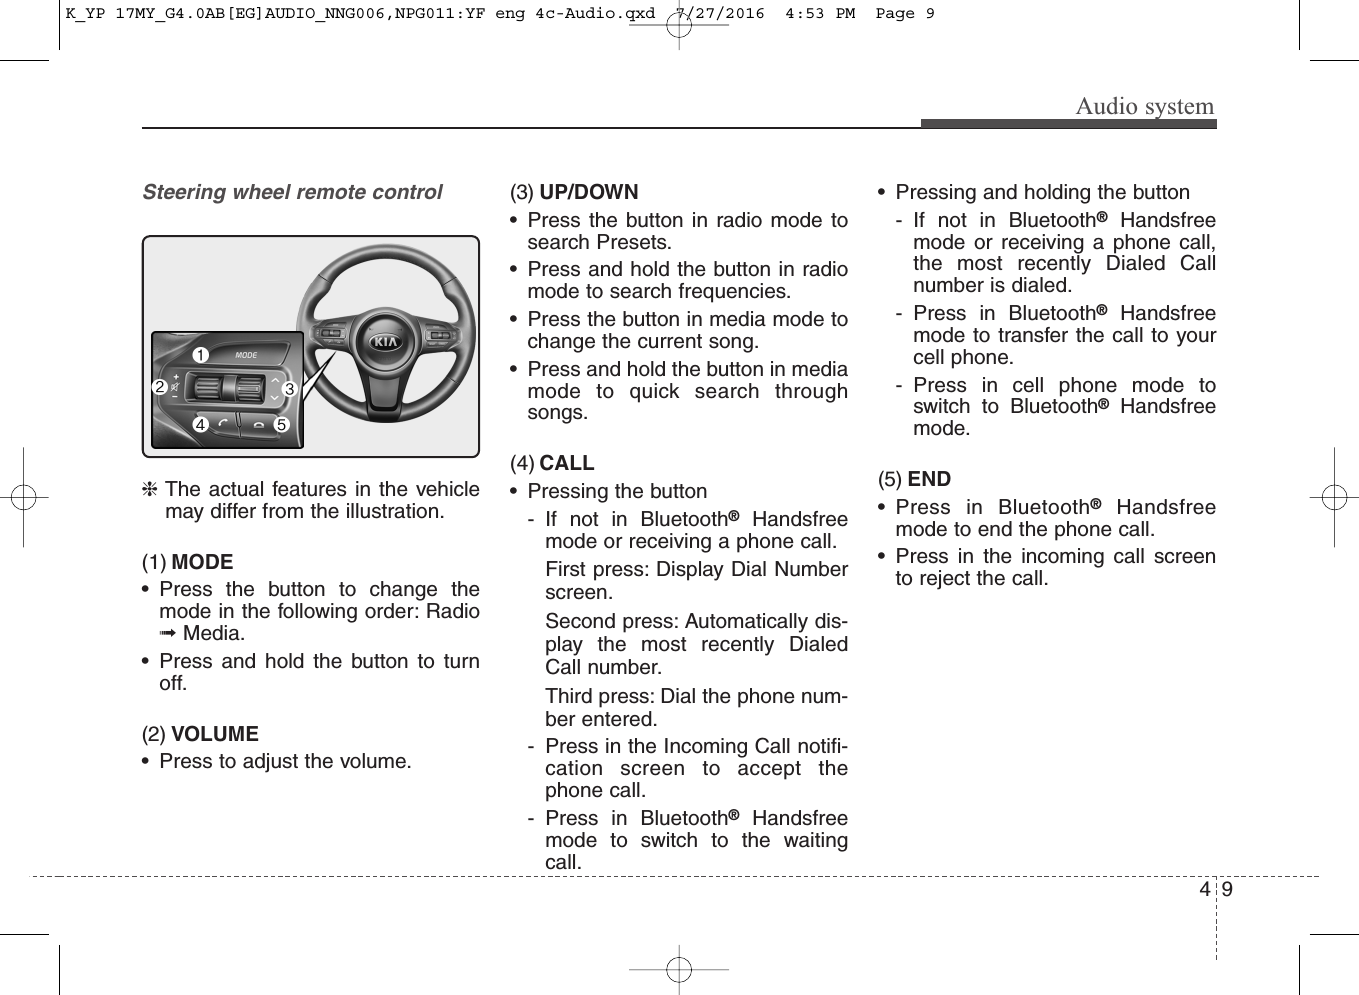 Audio system94Steering wheel remote control❈The actual features in the vehiclemay differ from the illustration.(1) MODE• Press the button to change themode in the following order: Radio➟Media.• Press and hold the button to turnoff.(2) VOLUME• Press to adjust the volume.(3) UP/DOWN• Press the button in radio mode tosearch Presets.• Press and hold the button in radiomode to search frequencies.• Press the button in media mode tochange the current song.• Press and hold the button in mediamode to quick search throughsongs.(4) CALL• Pressing the button- If not in Bluetooth®Handsfreemode or receiving a phone call.First press: Display Dial Numberscreen.Second press: Automatically dis-play the most recently DialedCall number.Third press: Dial the phone num-ber entered.- Press in the Incoming Call notifi-cation screen to accept thephone call.- Press in Bluetooth®Handsfreemode to switch to the waitingcall.• Pressing and holding the button- If not in Bluetooth®Handsfreemode or receiving a phone call,the most recently Dialed Callnumber is dialed.- Press in Bluetooth®Handsfreemode to transfer the call to yourcell phone.- Press in cell phone mode toswitch to Bluetooth®Handsfreemode.(5) END• Press in Bluetooth®Handsfreemode to end the phone call.• Press in the incoming call screento reject the call.K_YP 17MY_G4.0AB[EG]AUDIO_NNG006,NPG011:YF eng 4c-Audio.qxd  7/27/2016  4:53 PM  Page 9